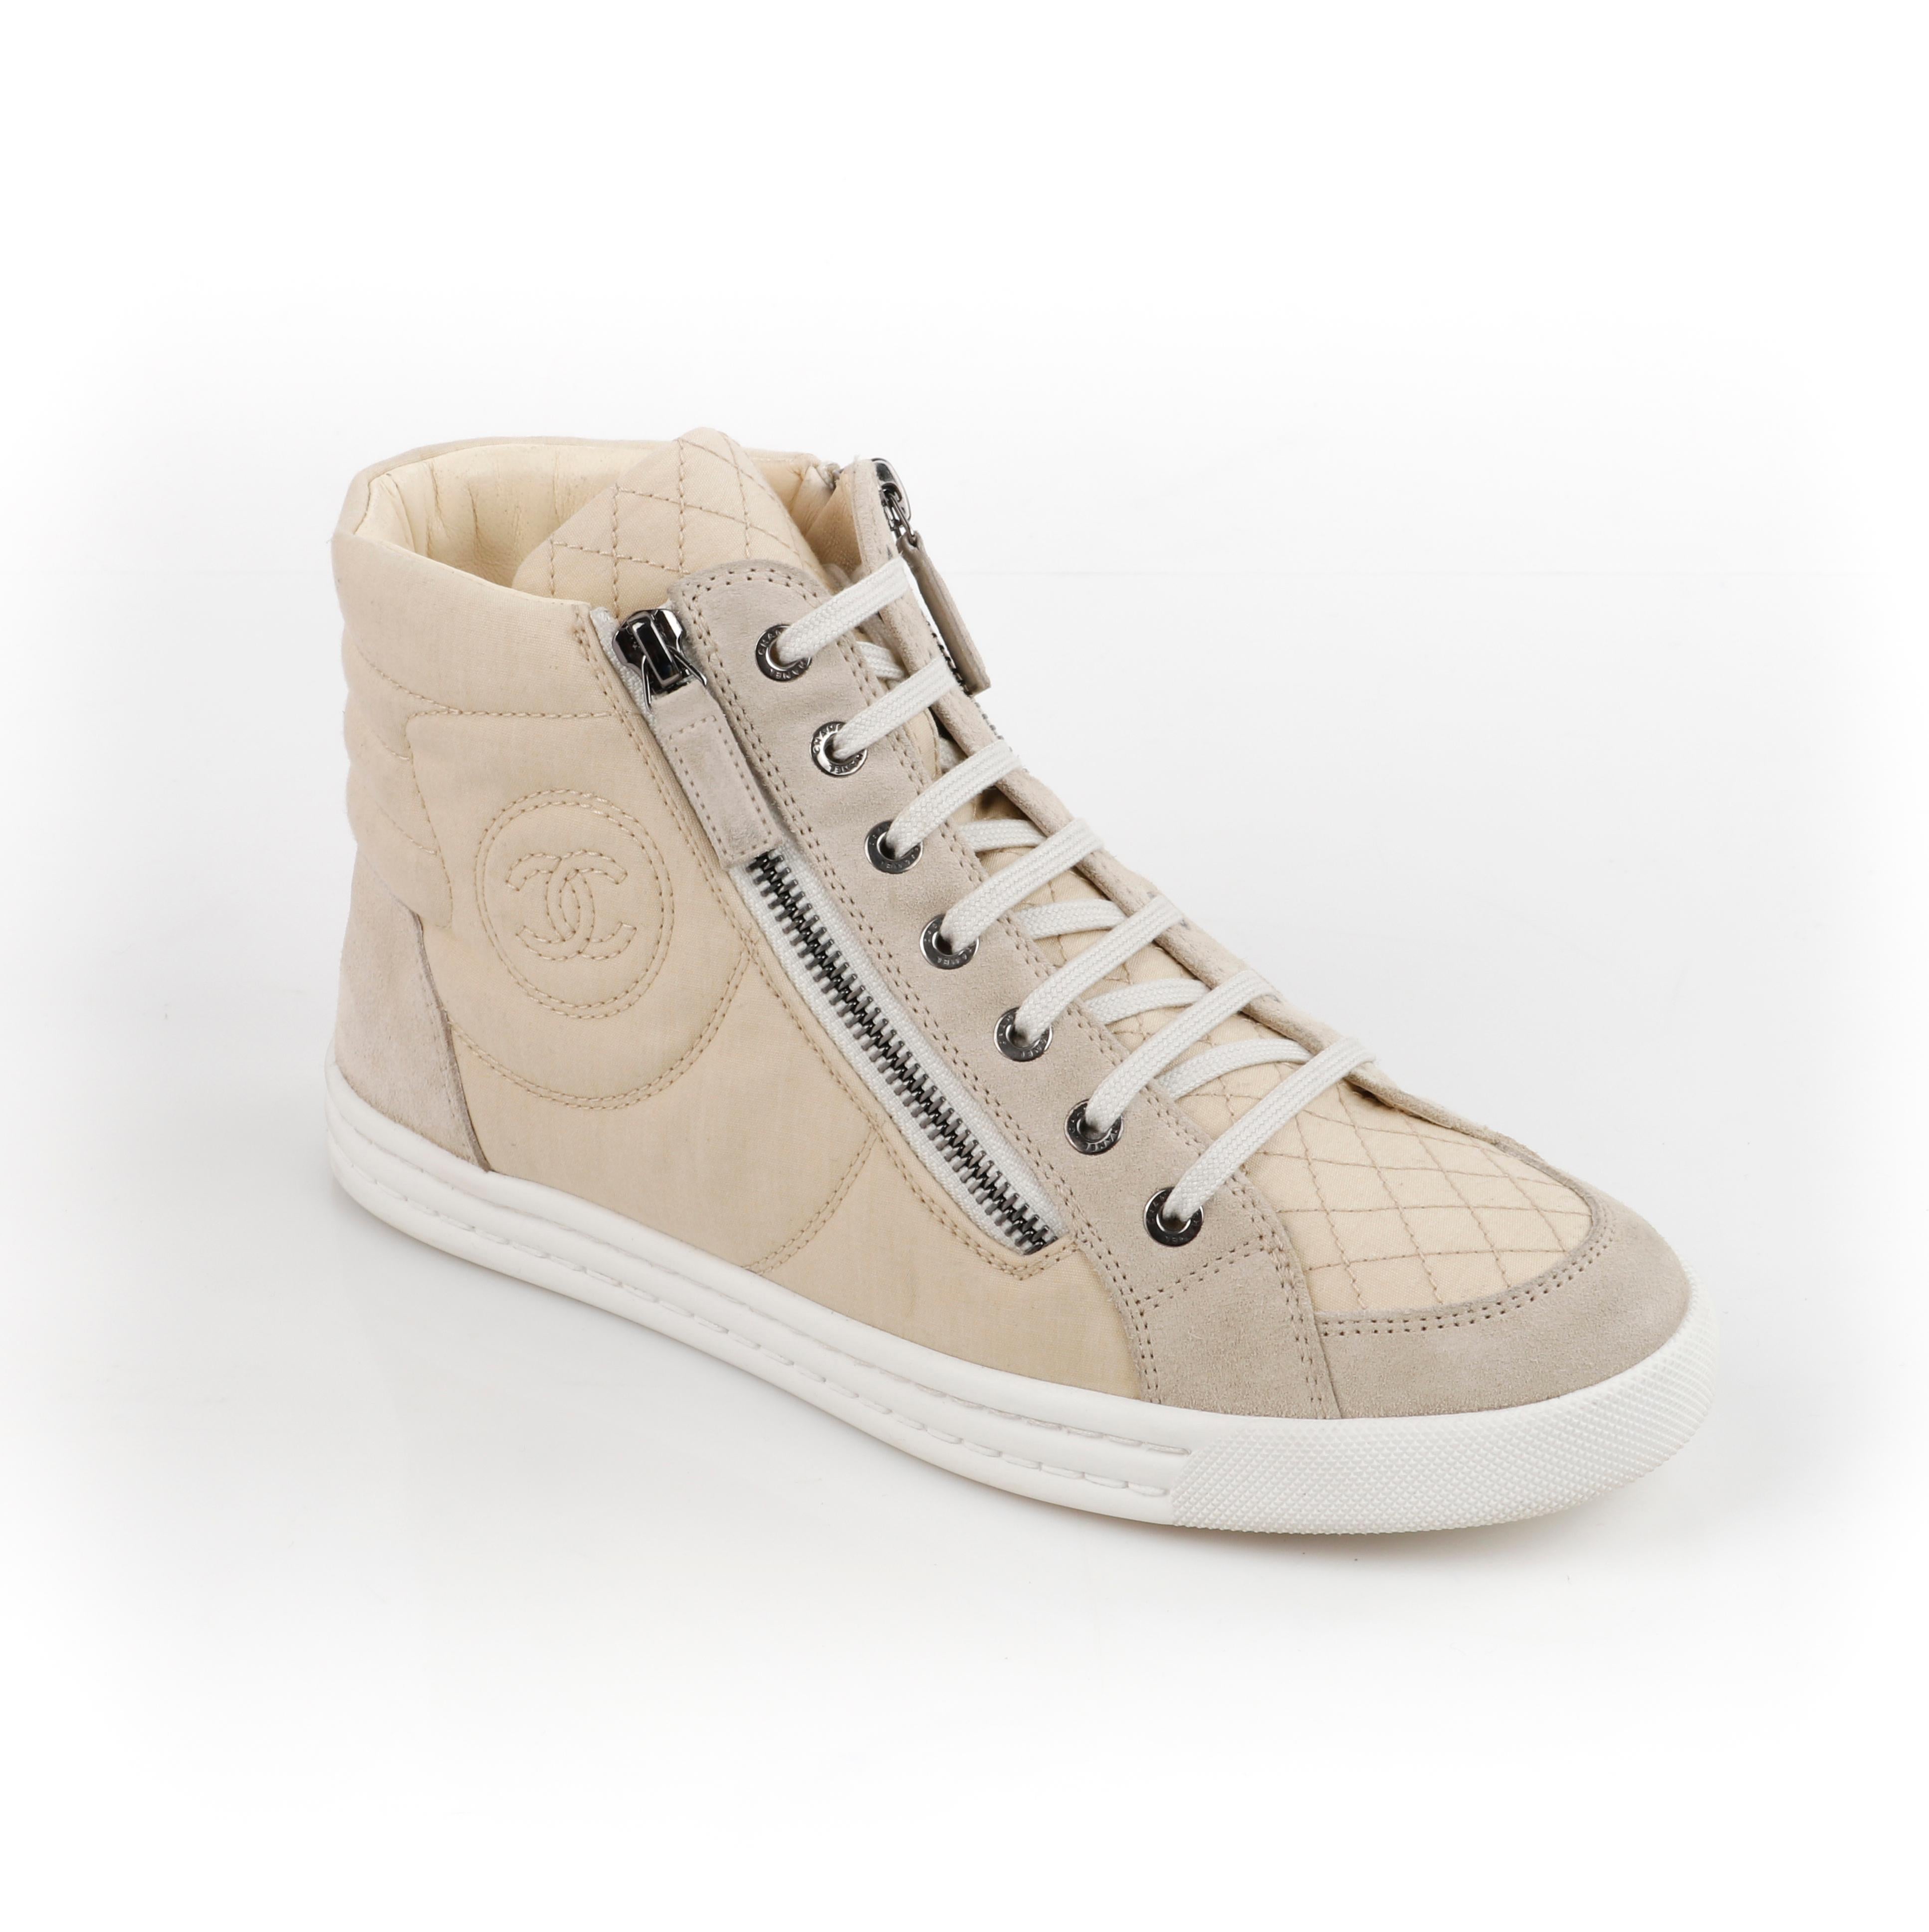 CHANEL Beige Quilted Canvas Lace Up High Top Sneakers
 
Brand / Manufacturer: Chanel
Style: High Top Sneakers
Color(s): Beige
Unmarked Materials (feel of): Canvas & Suede (upper); Rubber (soles); Leather (insoles).  
Additional Details / Inclusions: